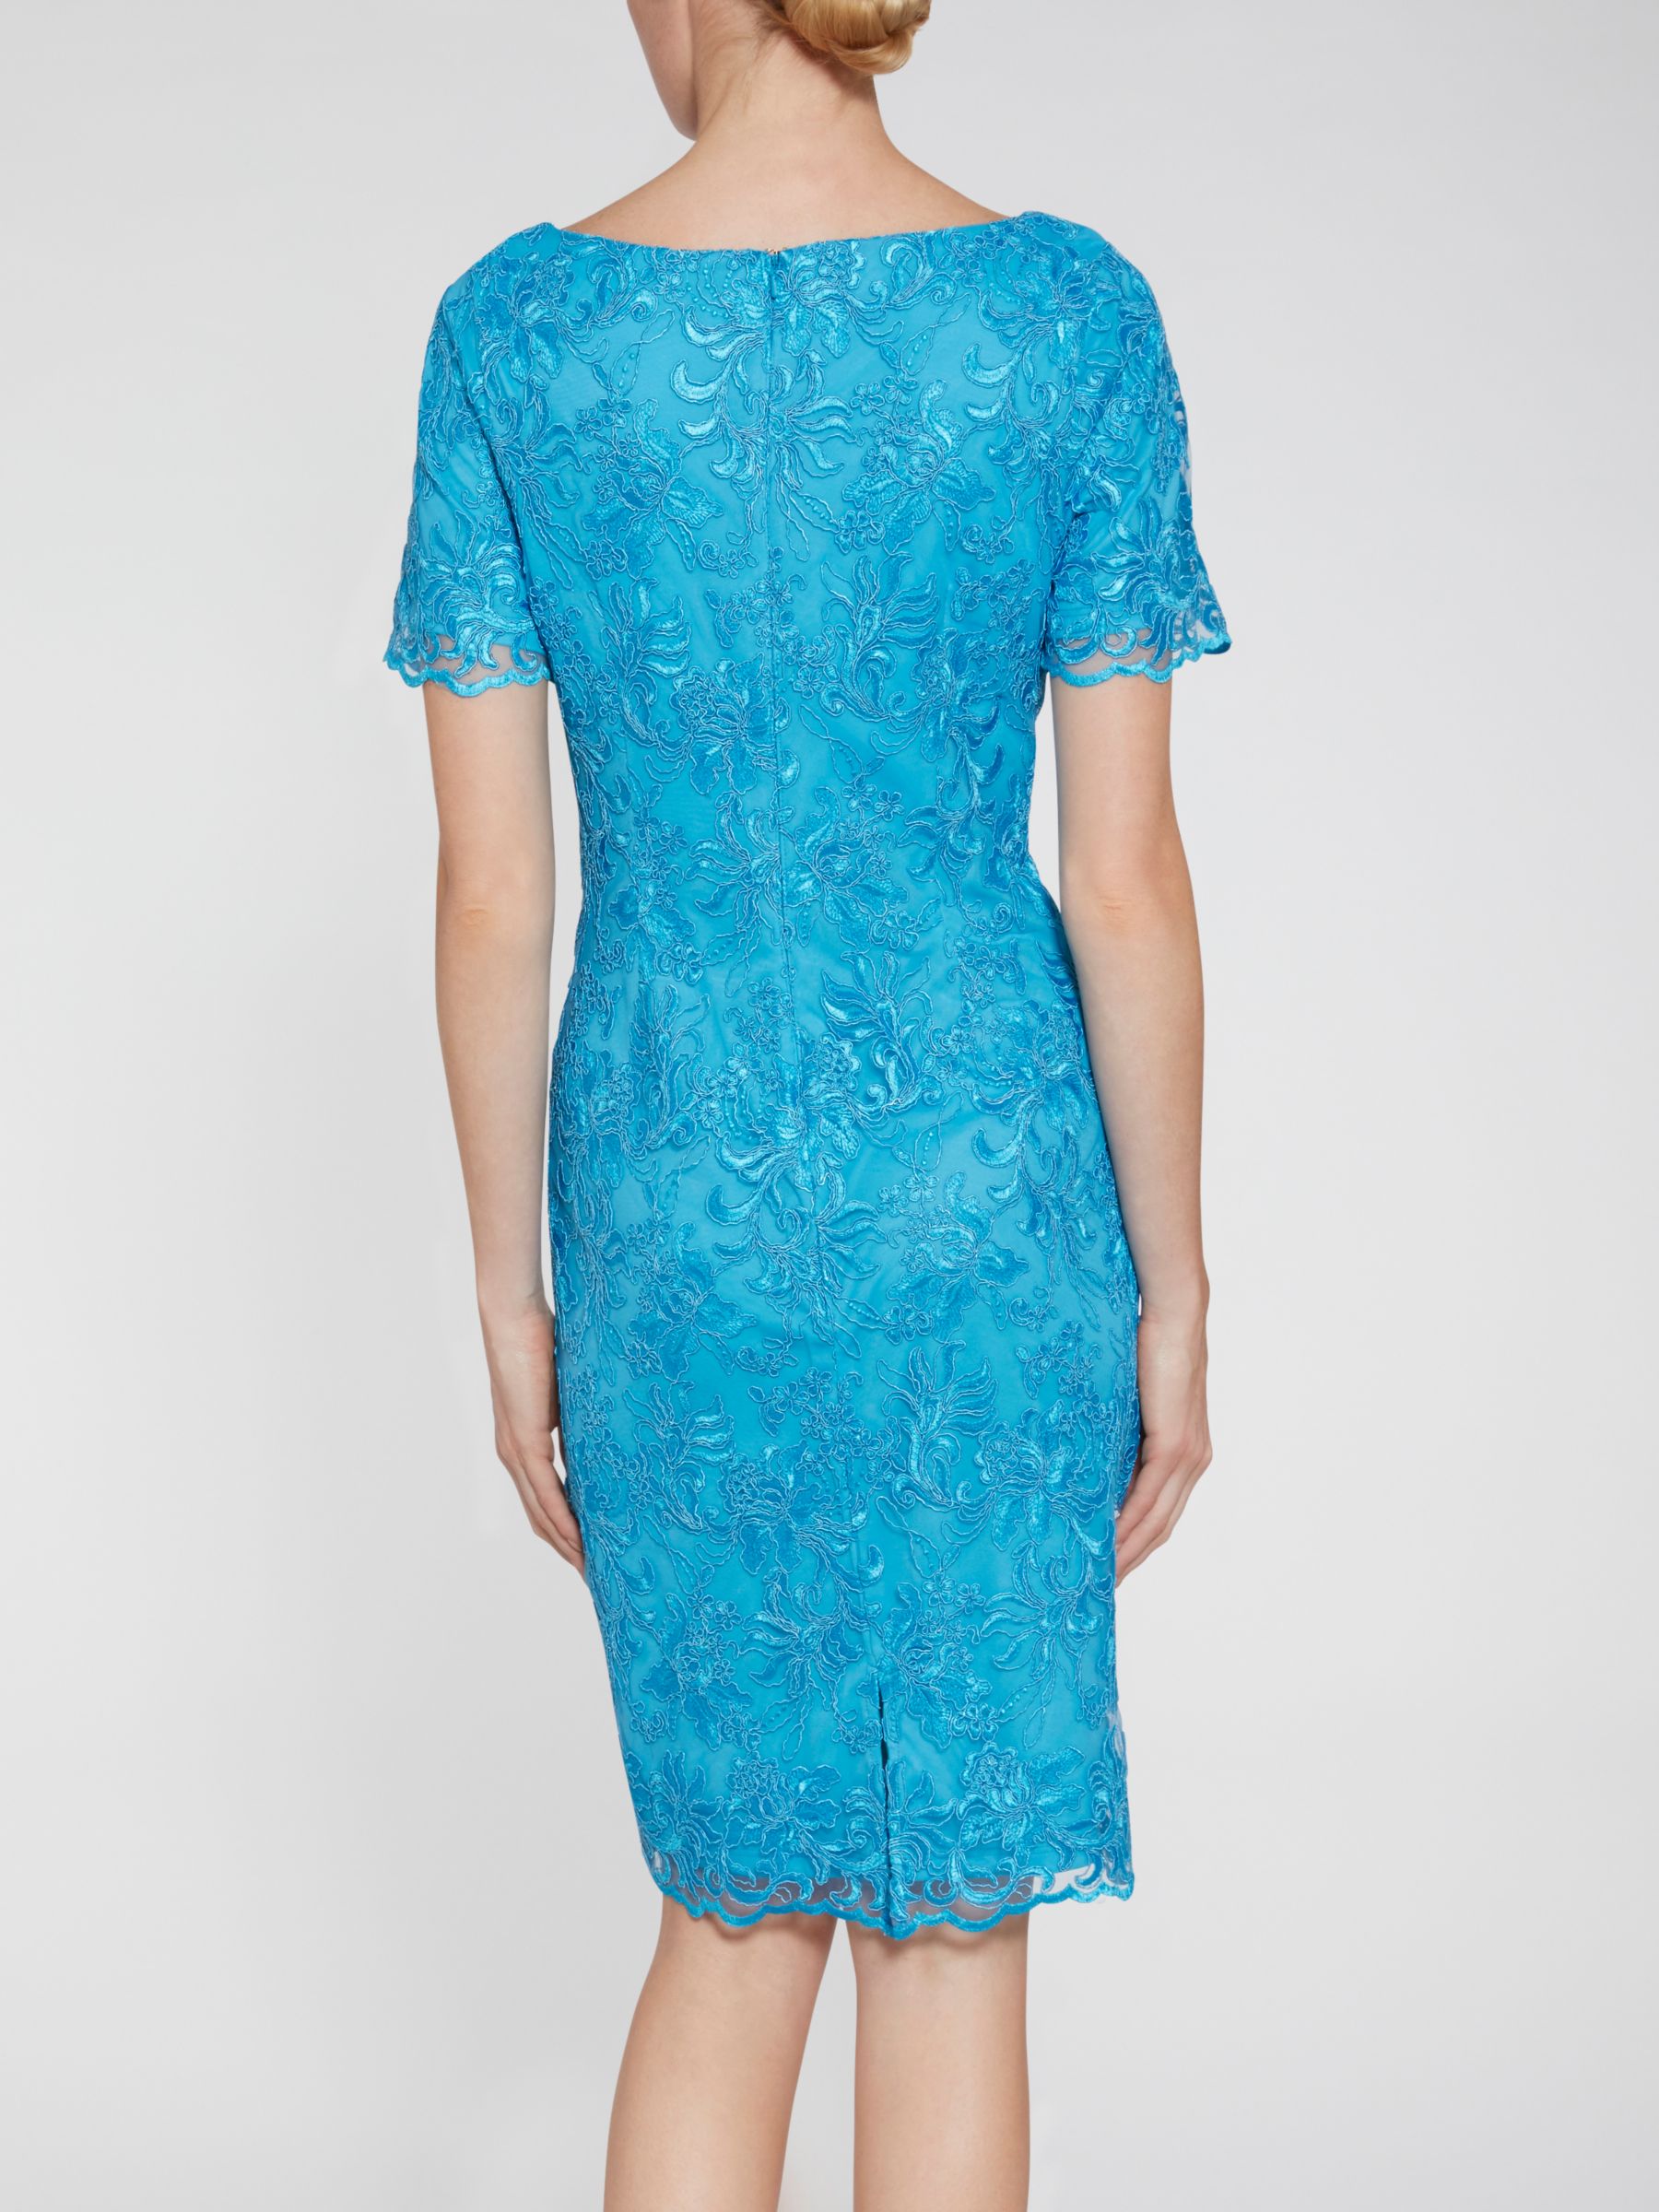 Gina Bacconi Embroidered Corded Dress at John Lewis